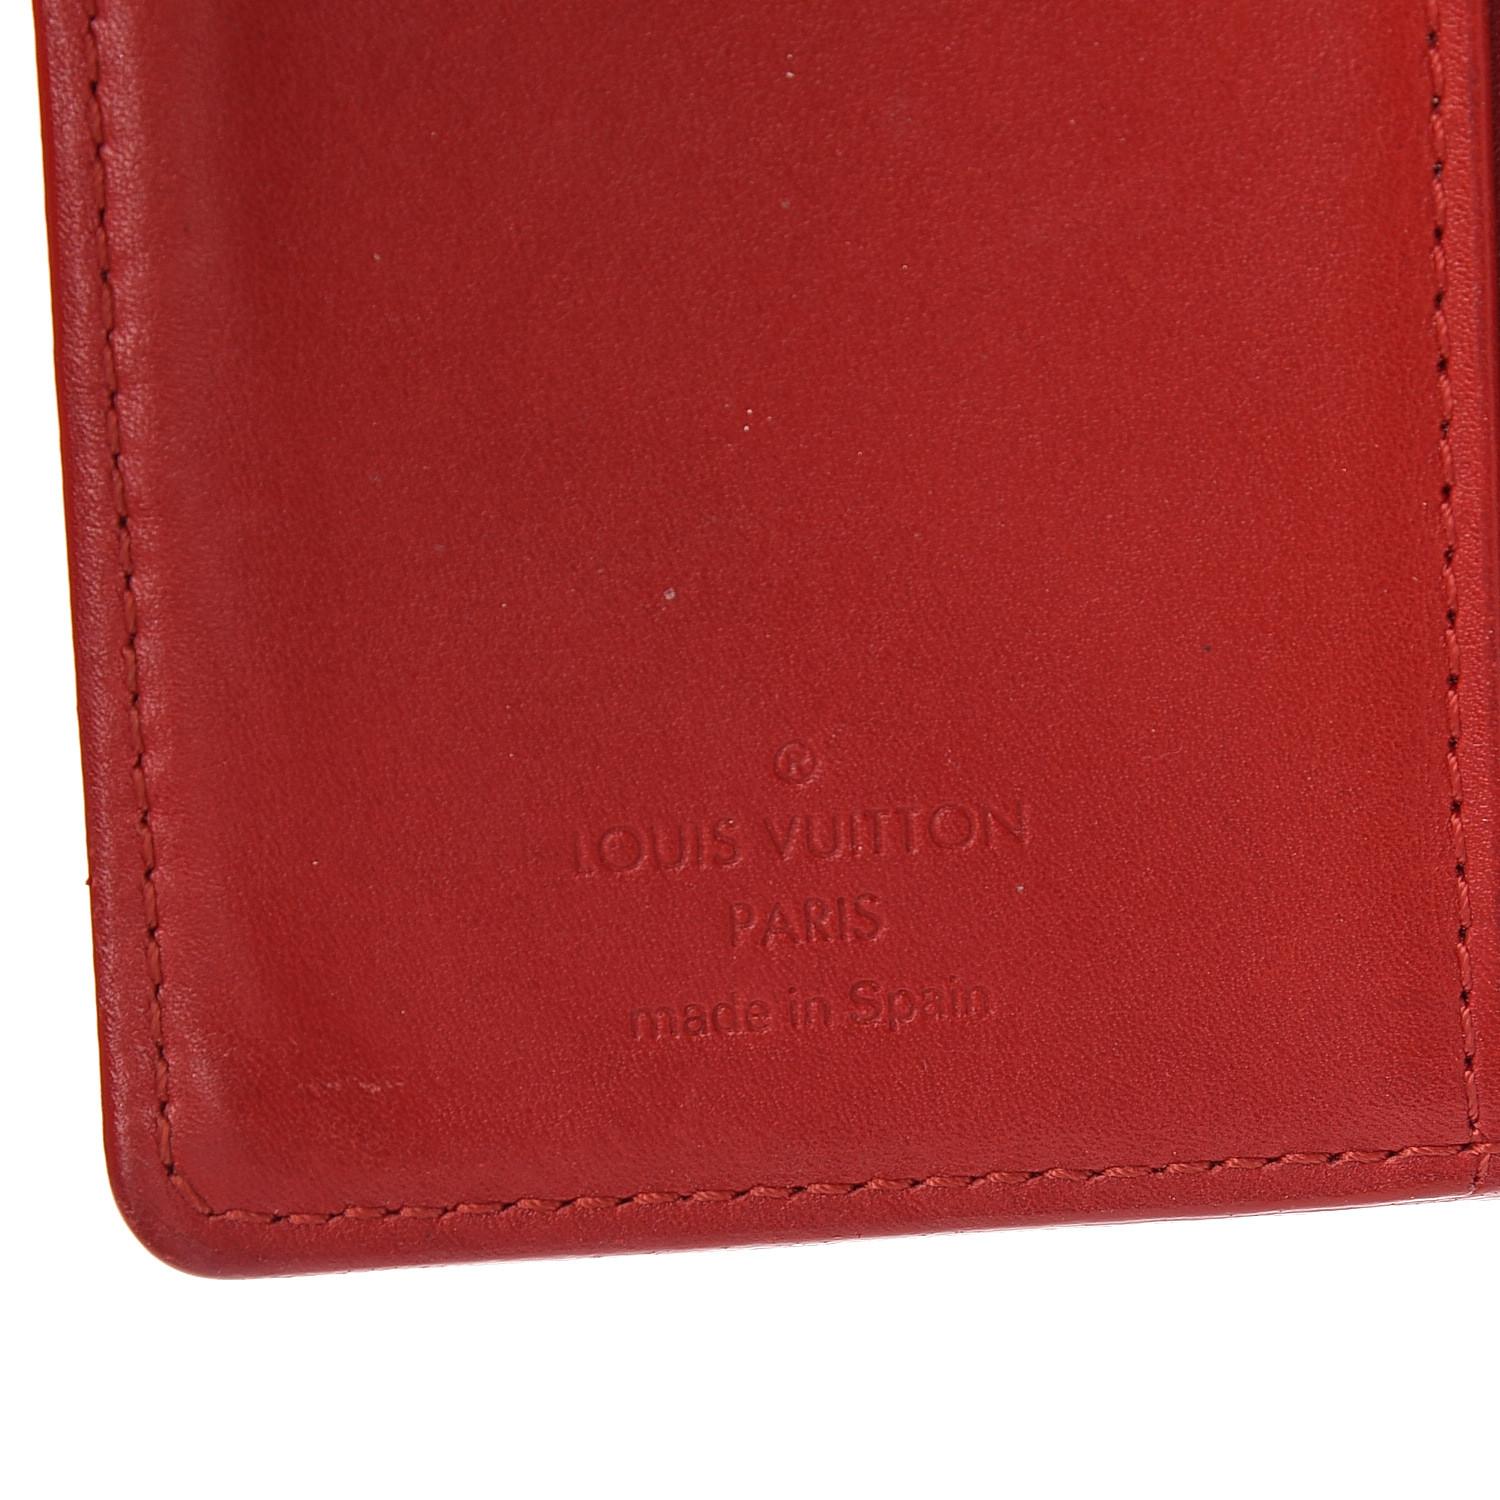 LOUIS VUITTON Vernis Small Ring Agenda Cover Red 568273